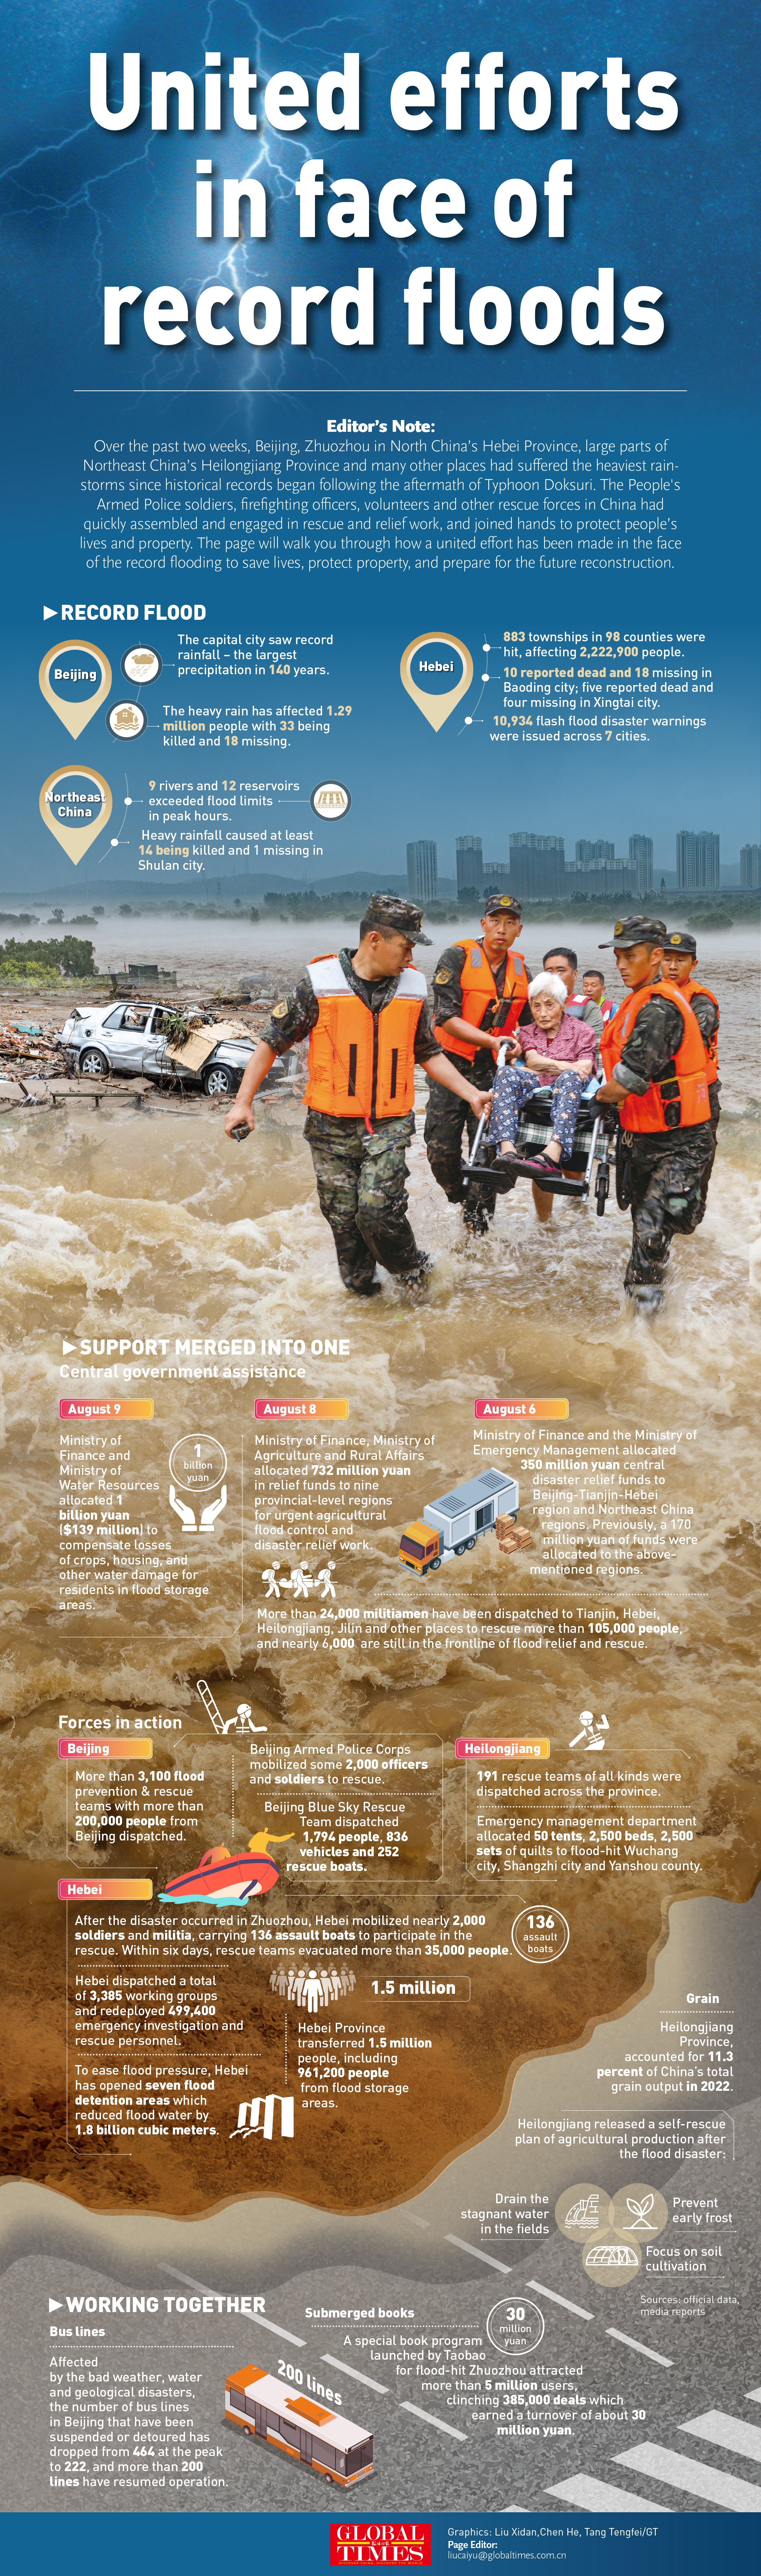  Since historical flood hit North and Northeast China following the aftermath of Typhoon Doksuri, the People's Armed Police soldiers, firefighting officers, volunteers and other rescue forces in China had quickly assembled and engaged in rescue and relief work.The page will walk you through how a united effort has been made in the face of the record flooding to save lives, protect property, and prepare for the future reconstruction.Graphics: Liu Xidan,Chen He, Tang Tengfei/GT